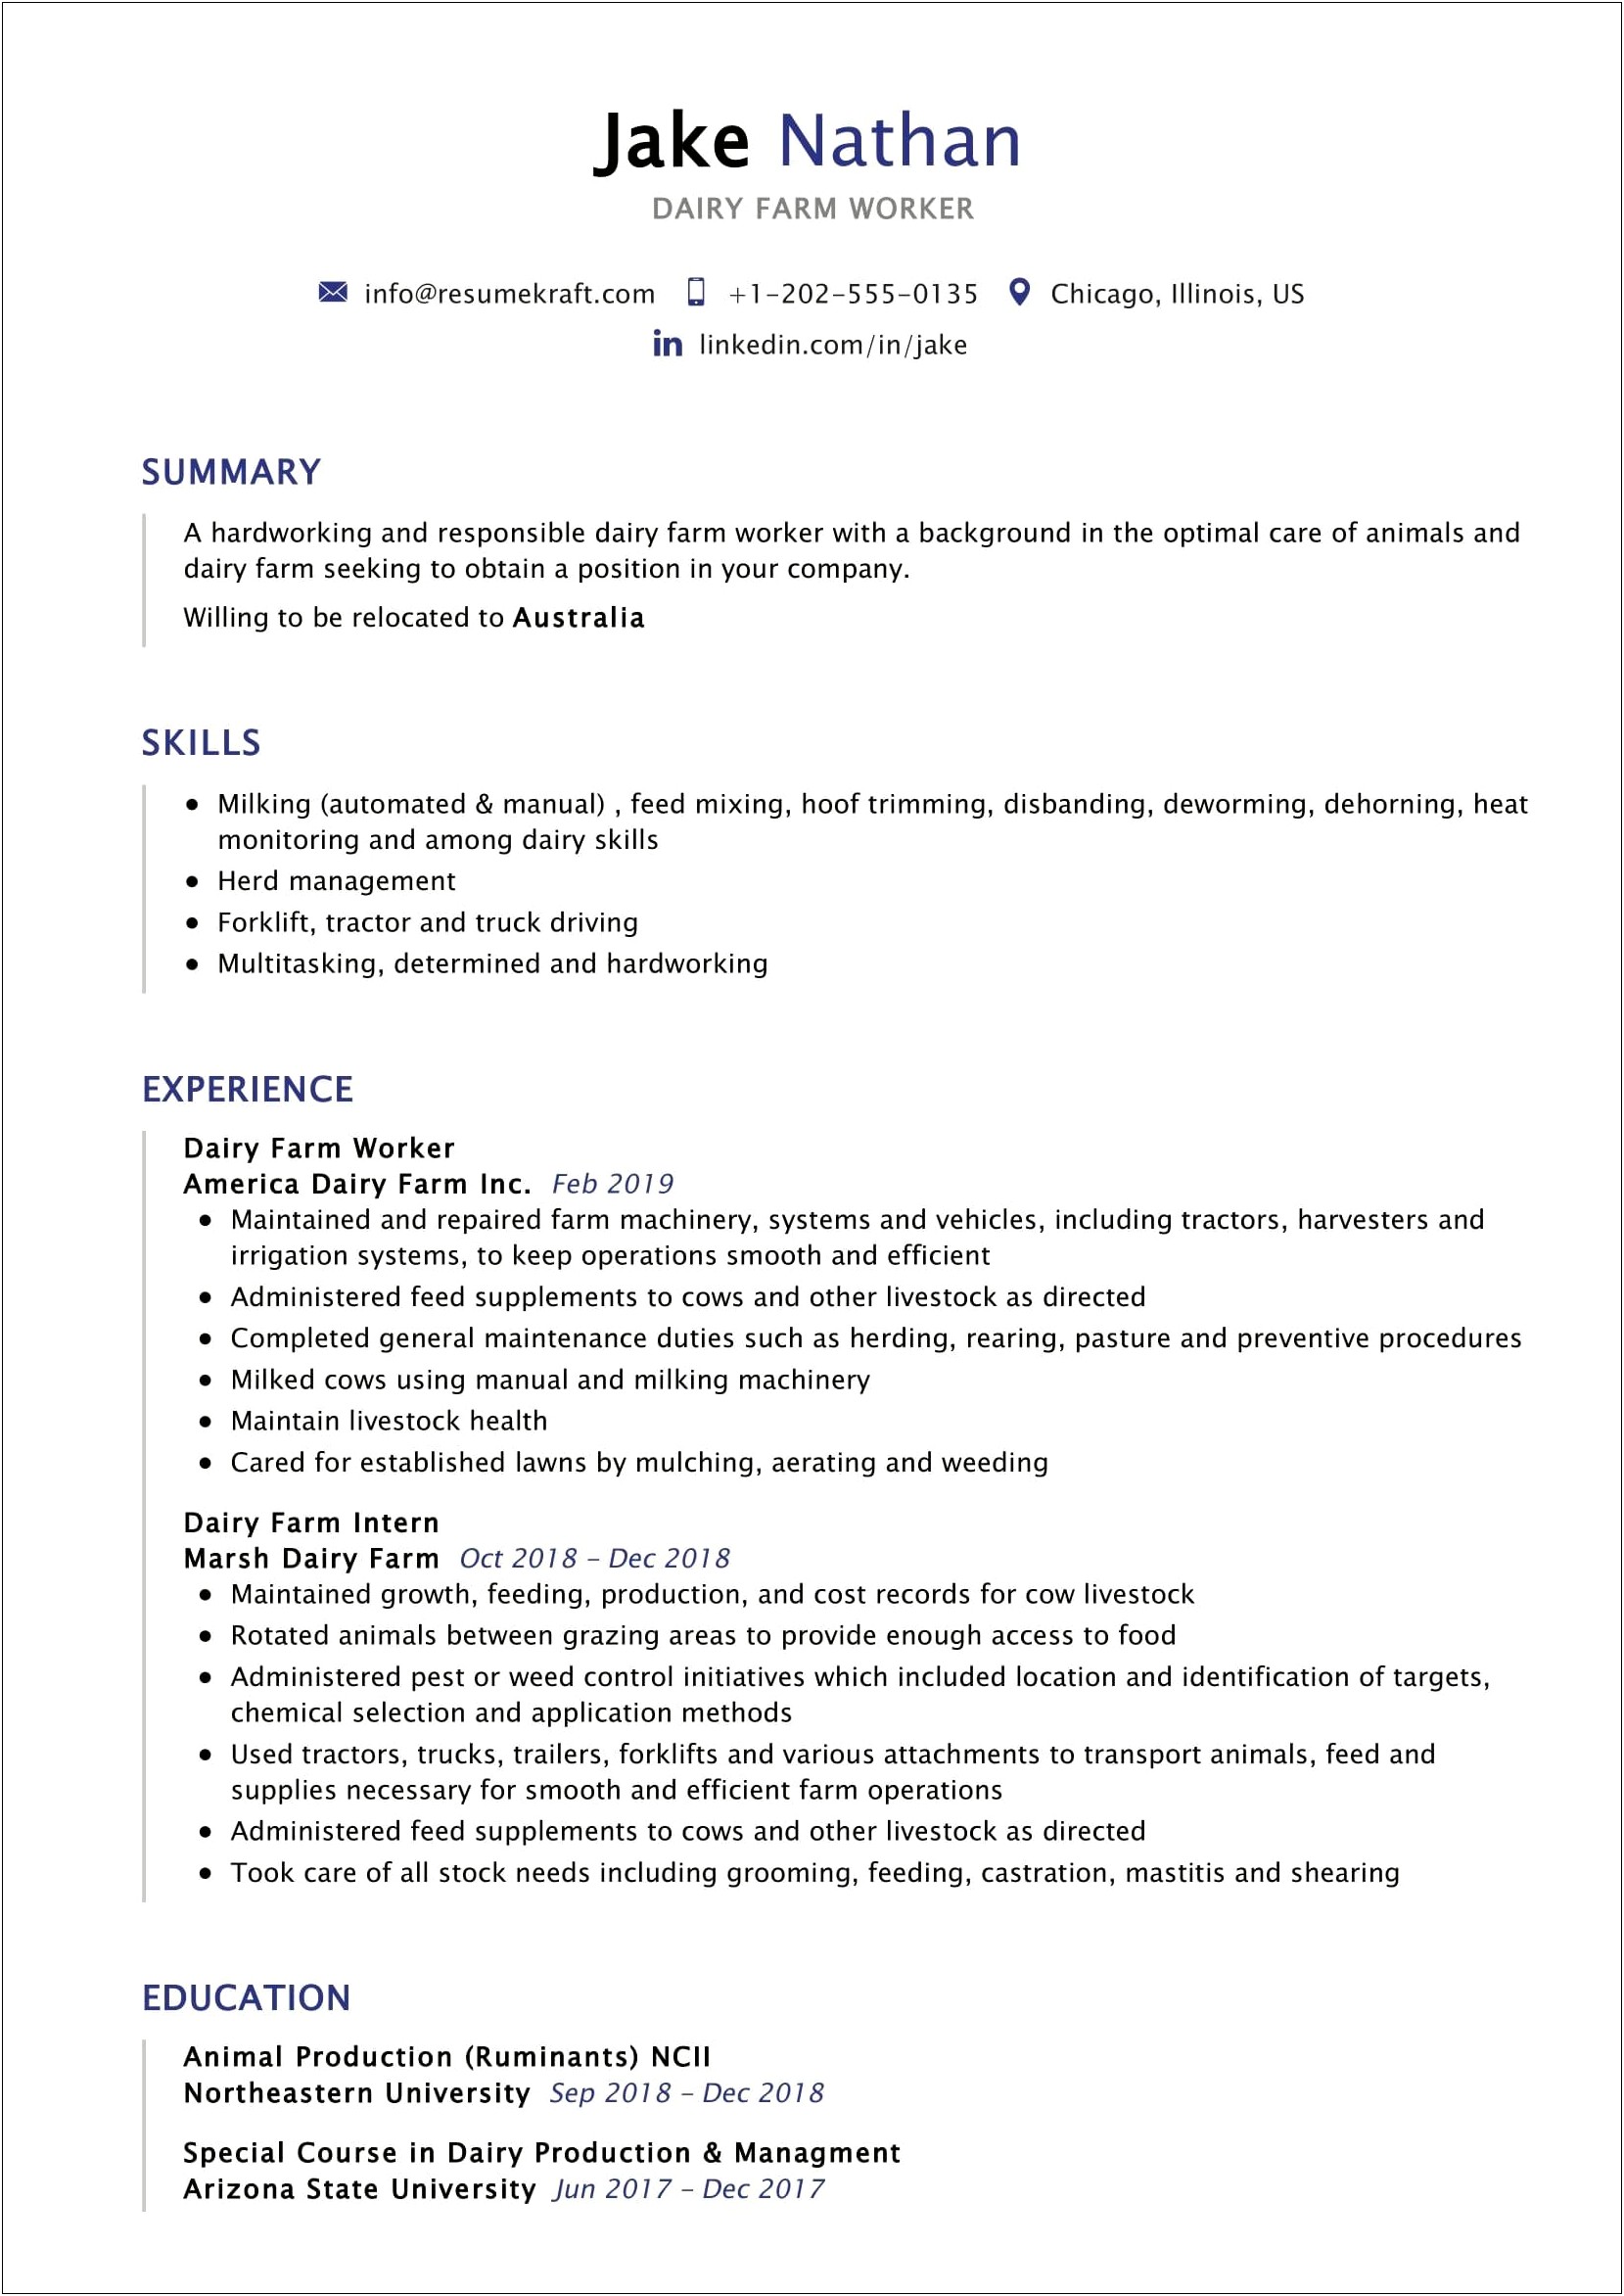 Objectives In Resume For Farming